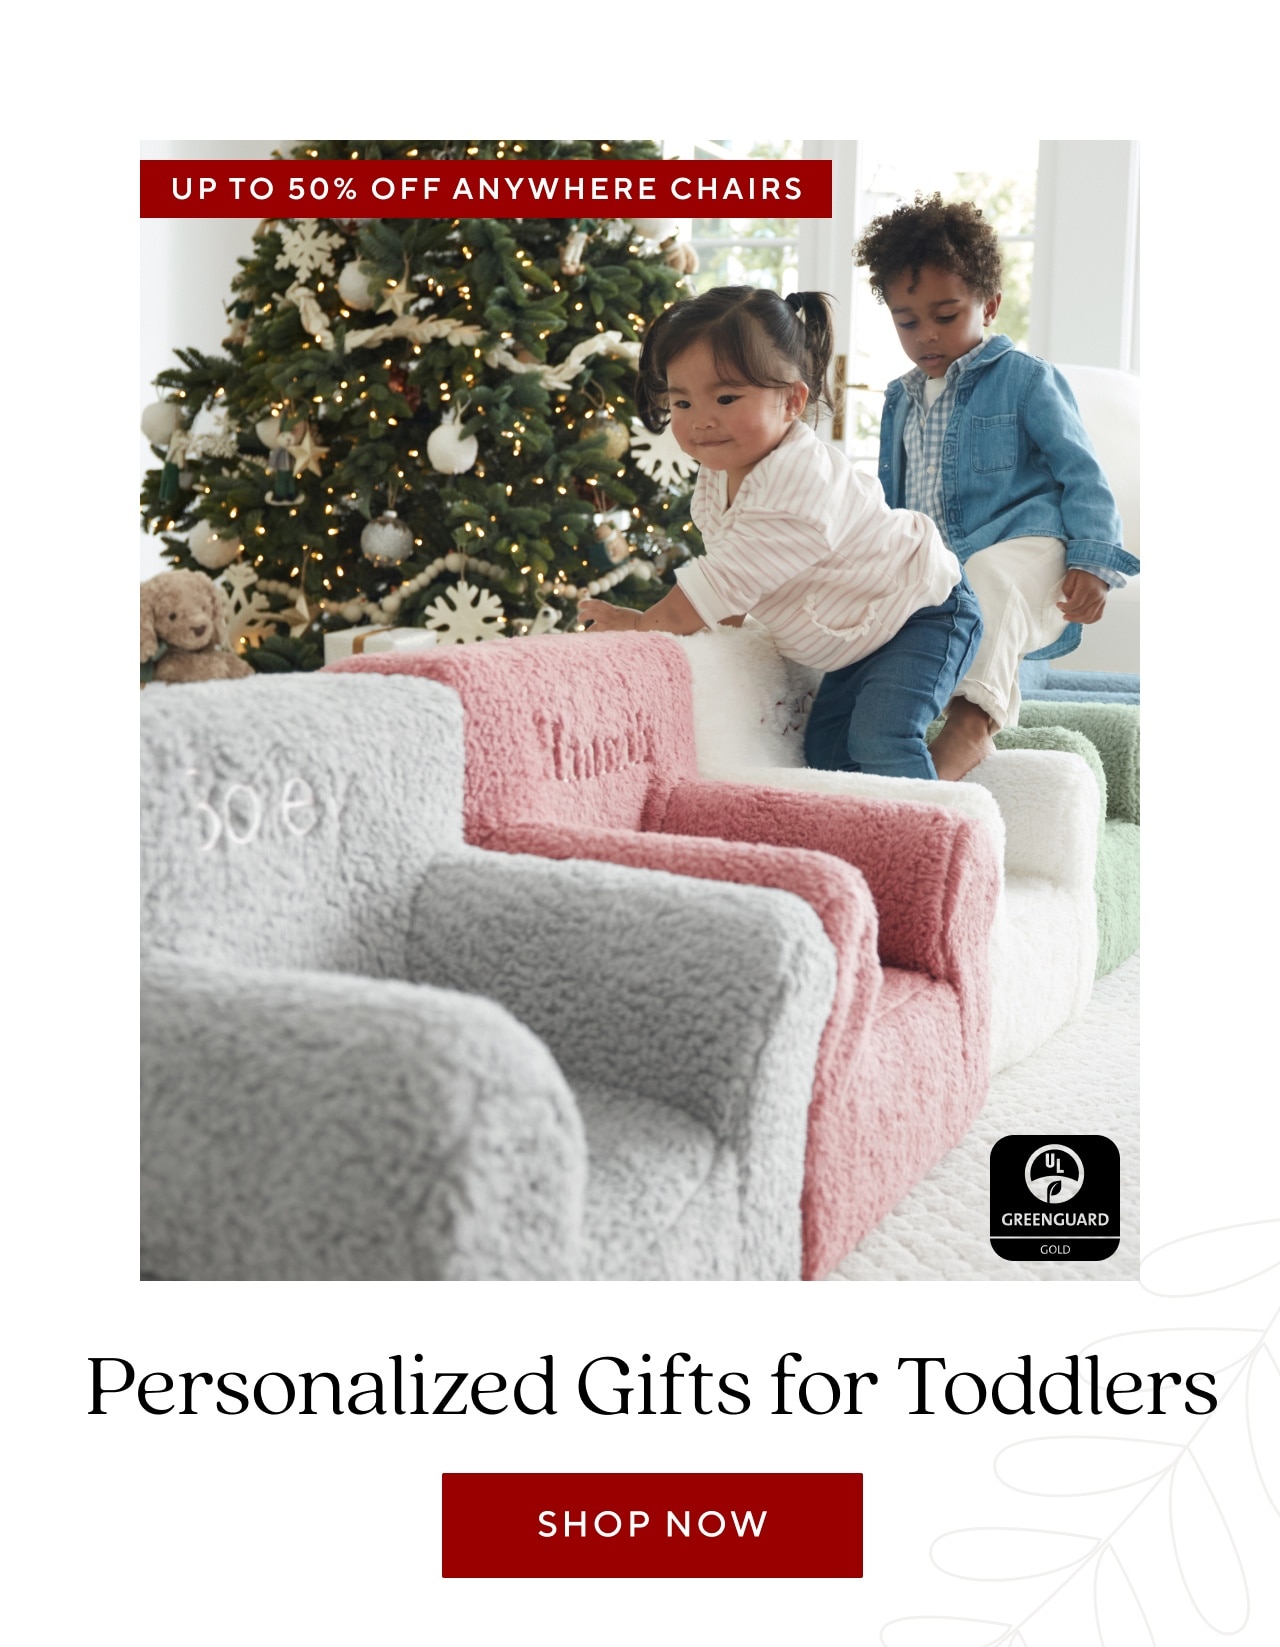 PERSONALIZED GIFTS FOR TODDLERS